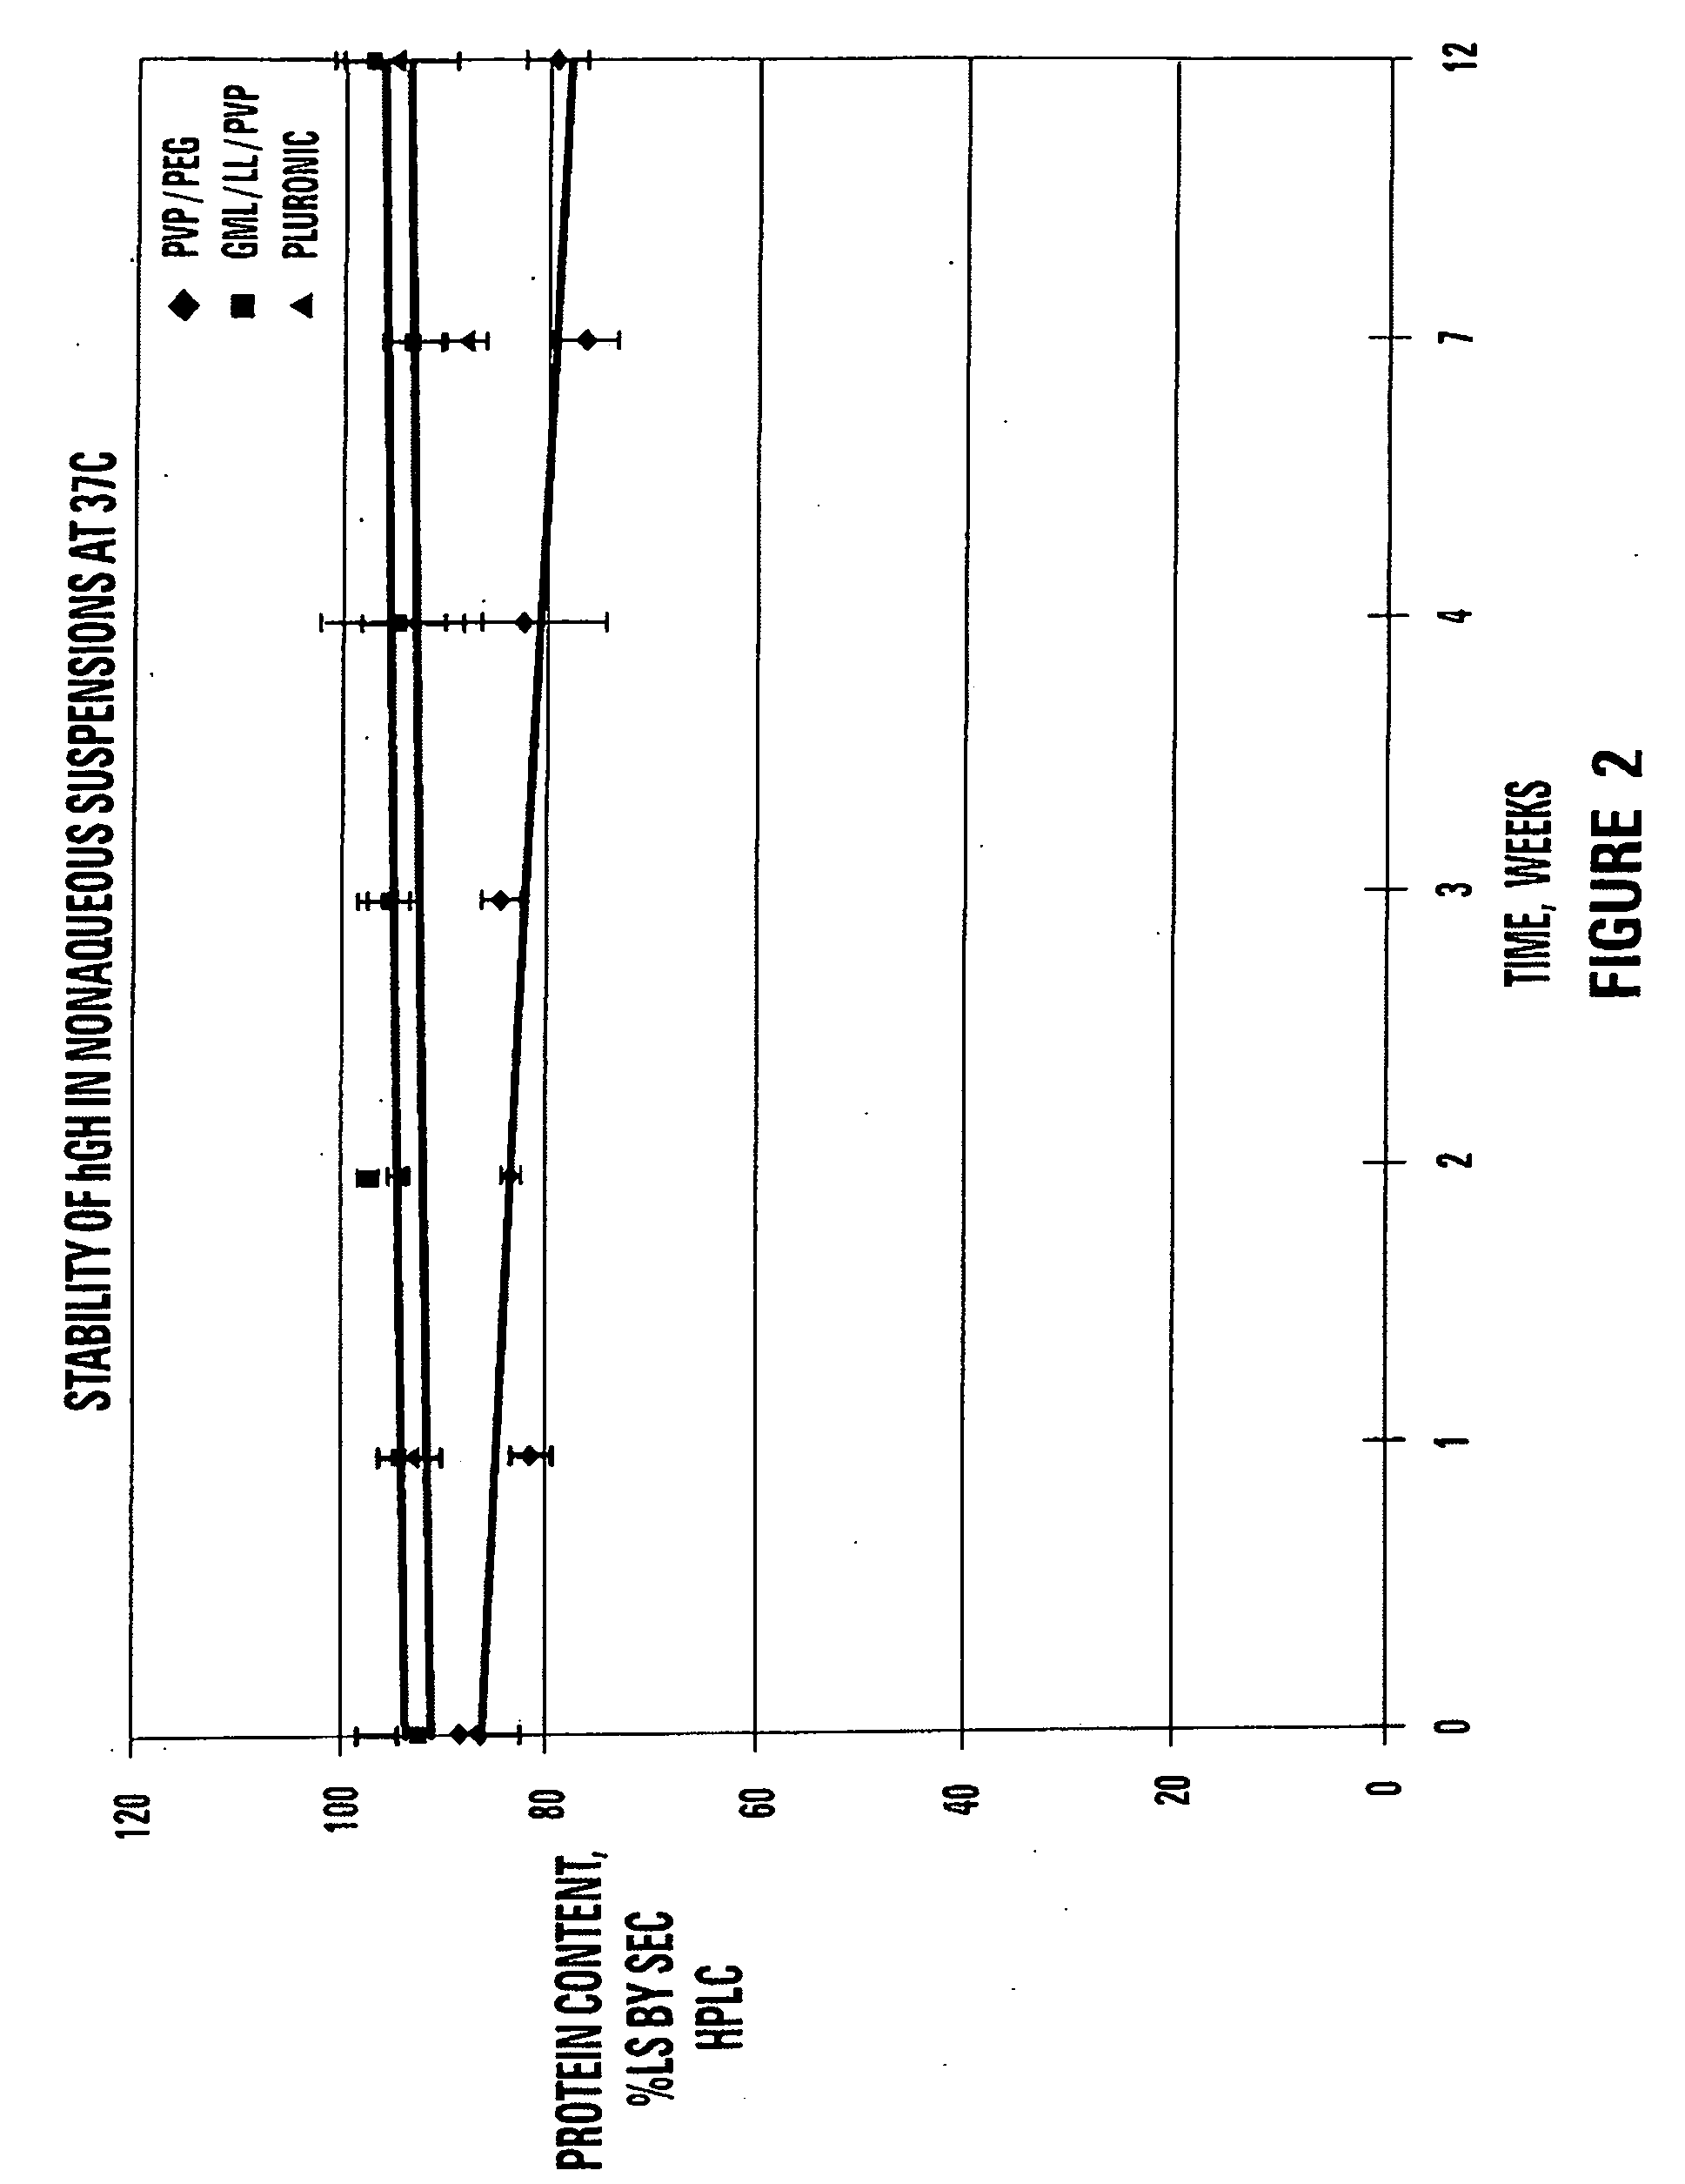 Stable non-aqueous single phase viscous vehicles and formulations utilizing such vehicles